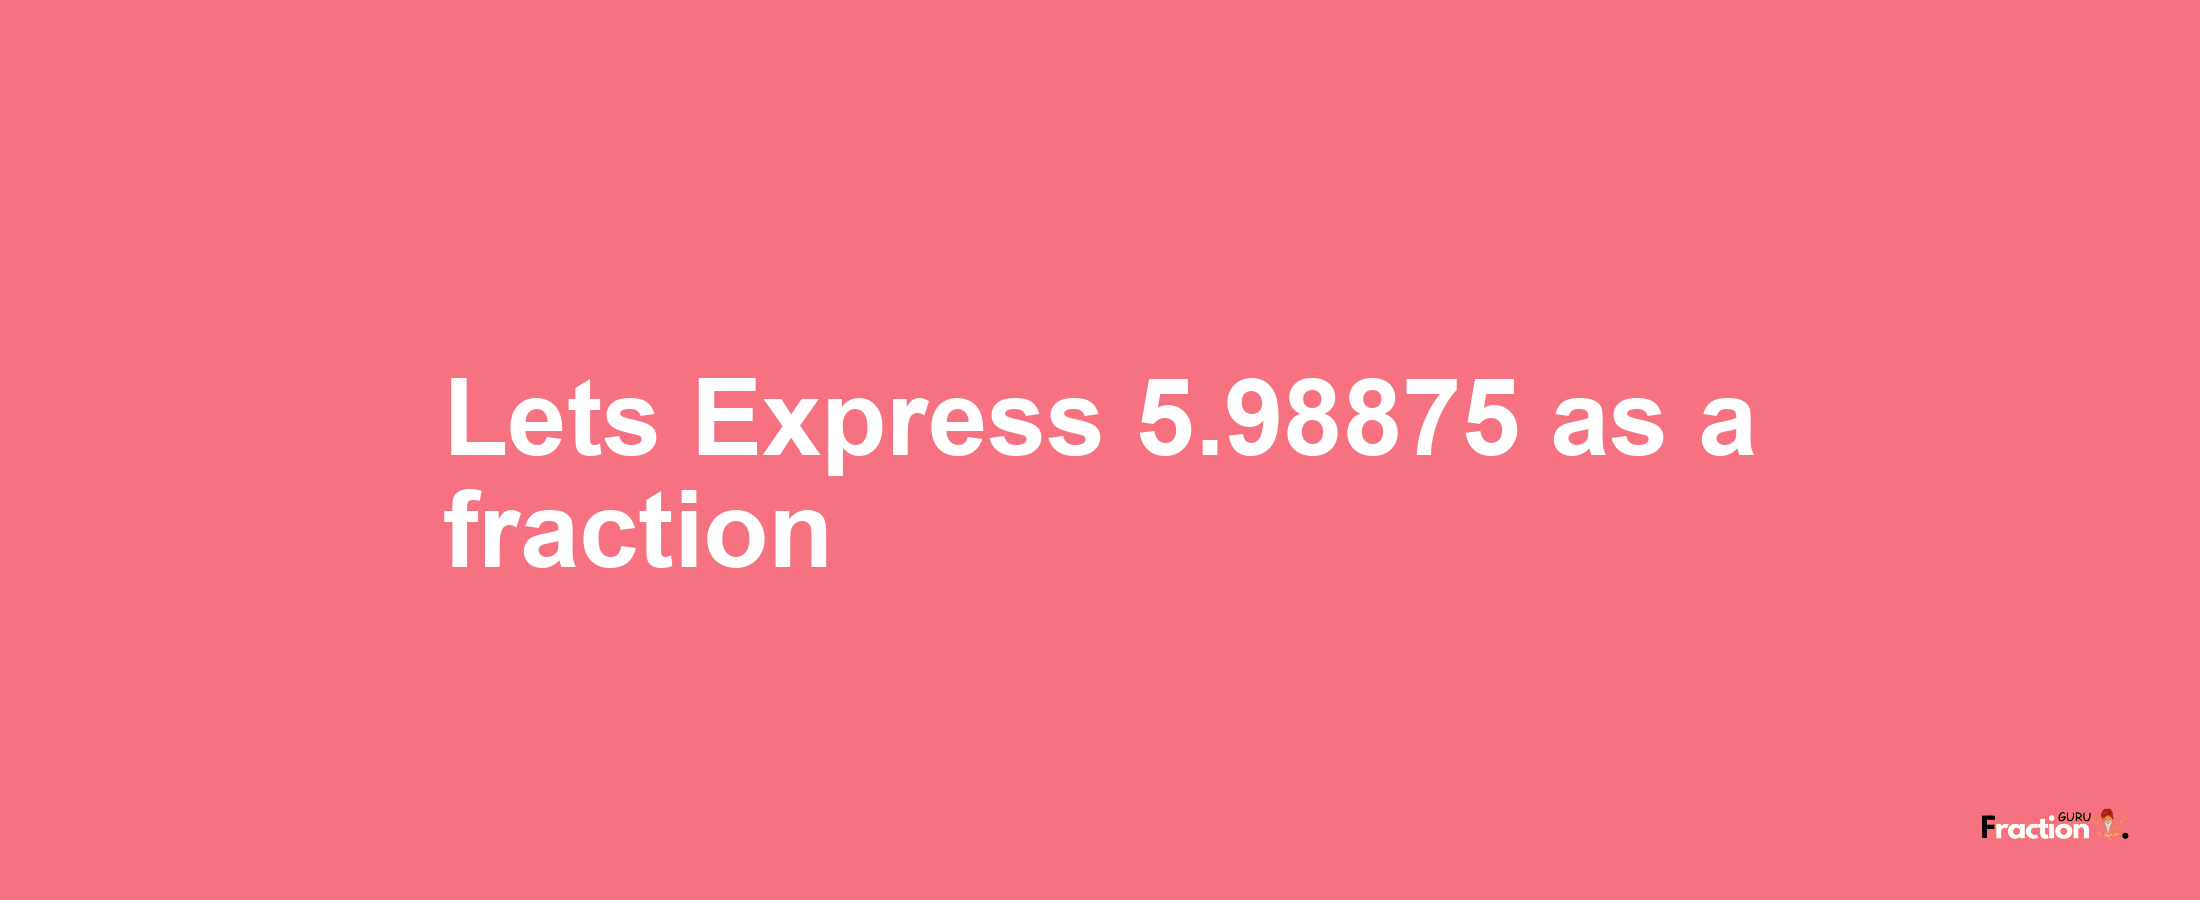 Lets Express 5.98875 as afraction